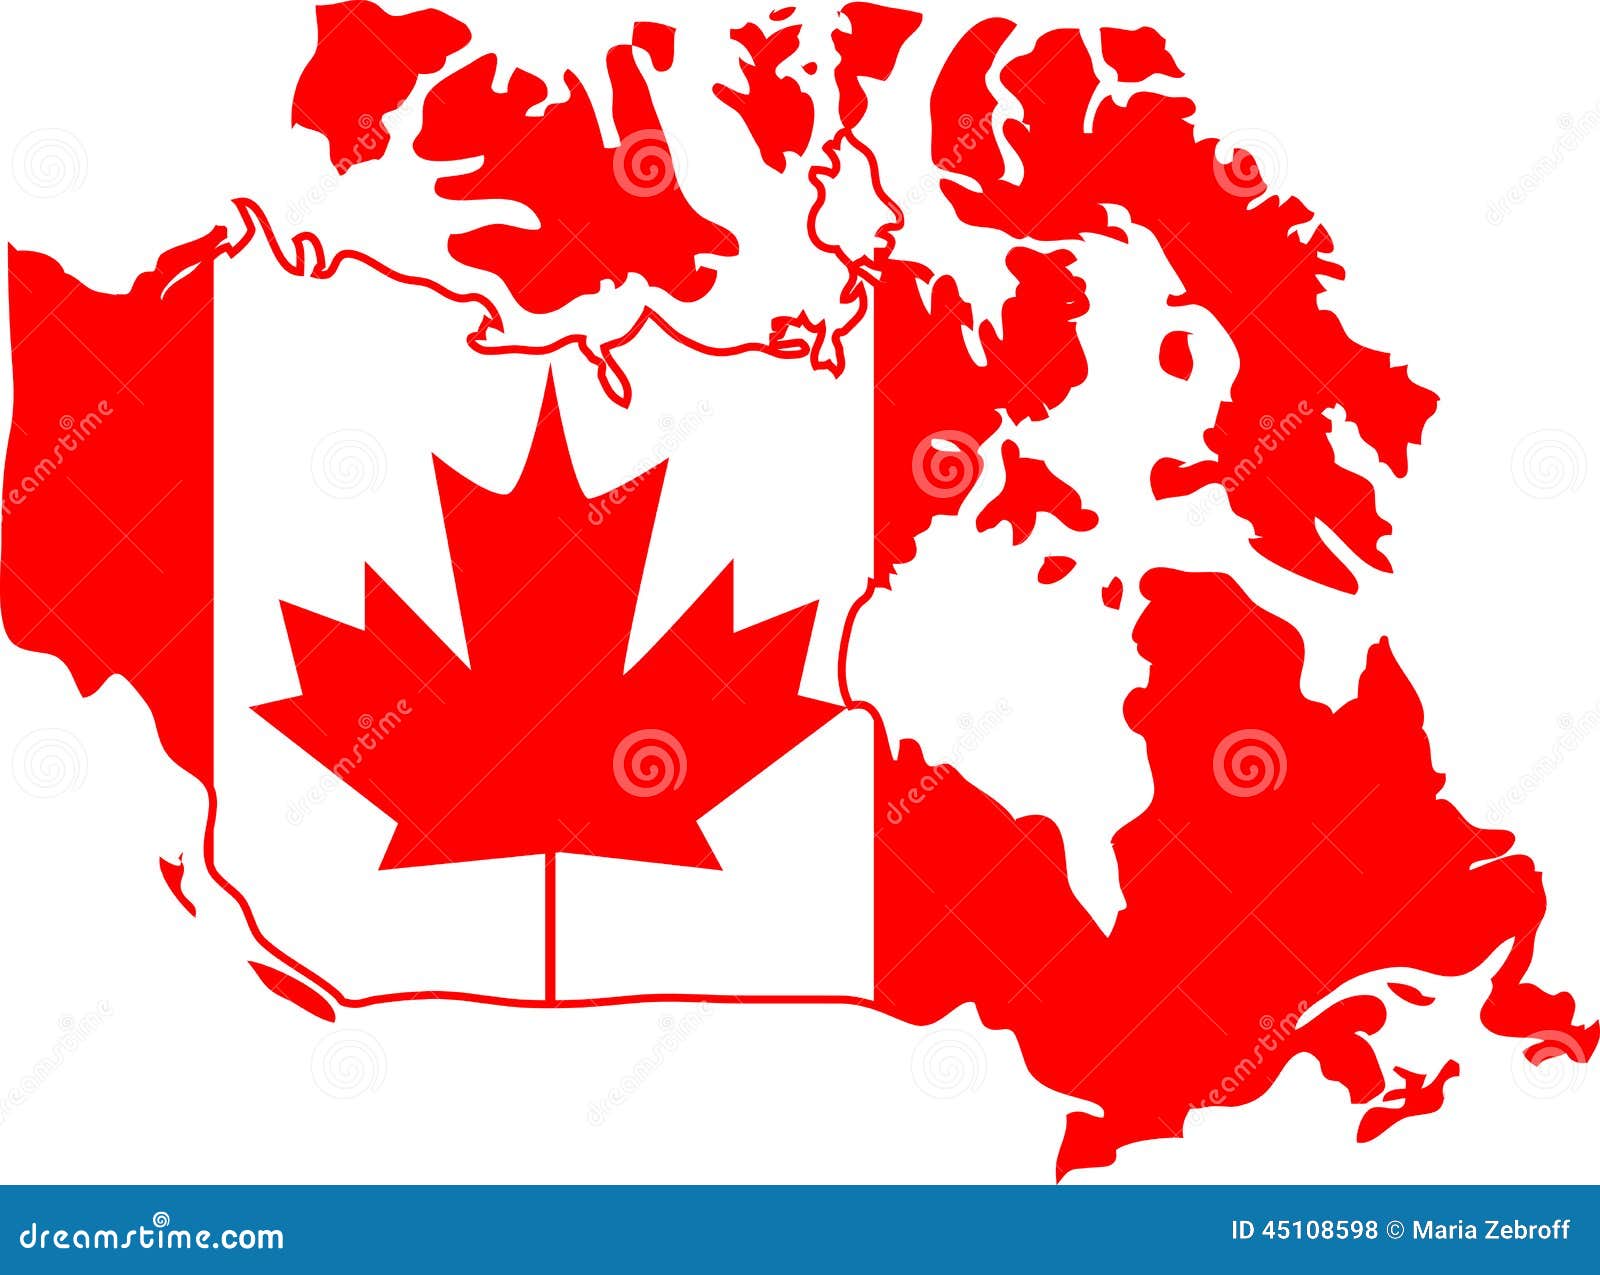 canadian clipart collection - photo #26